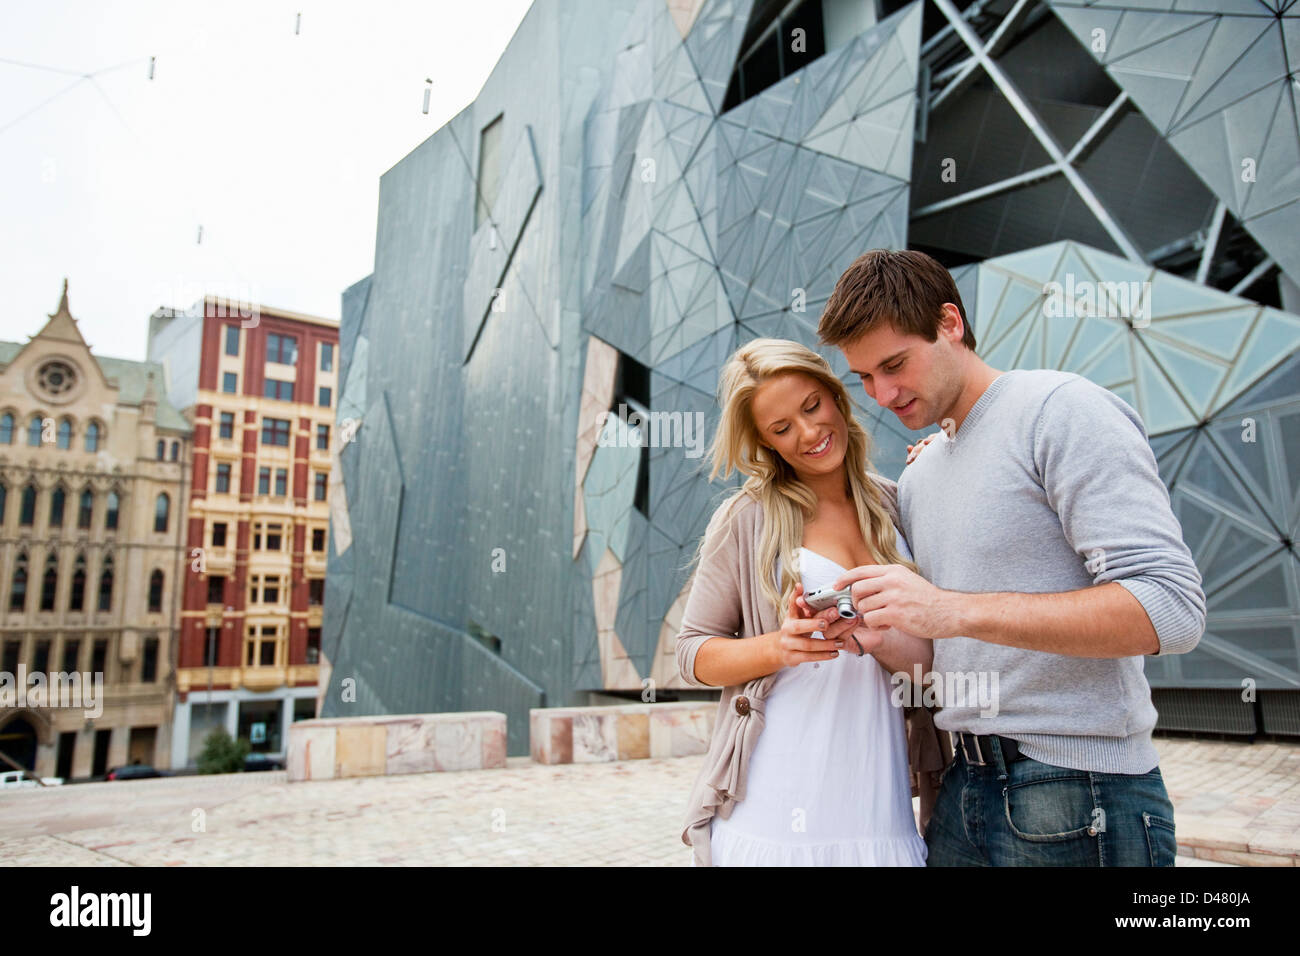 Young couple sightseeing in city, looking at photos on camera. Federation Square, Melbourne, Victoria, Australia Stock Photo